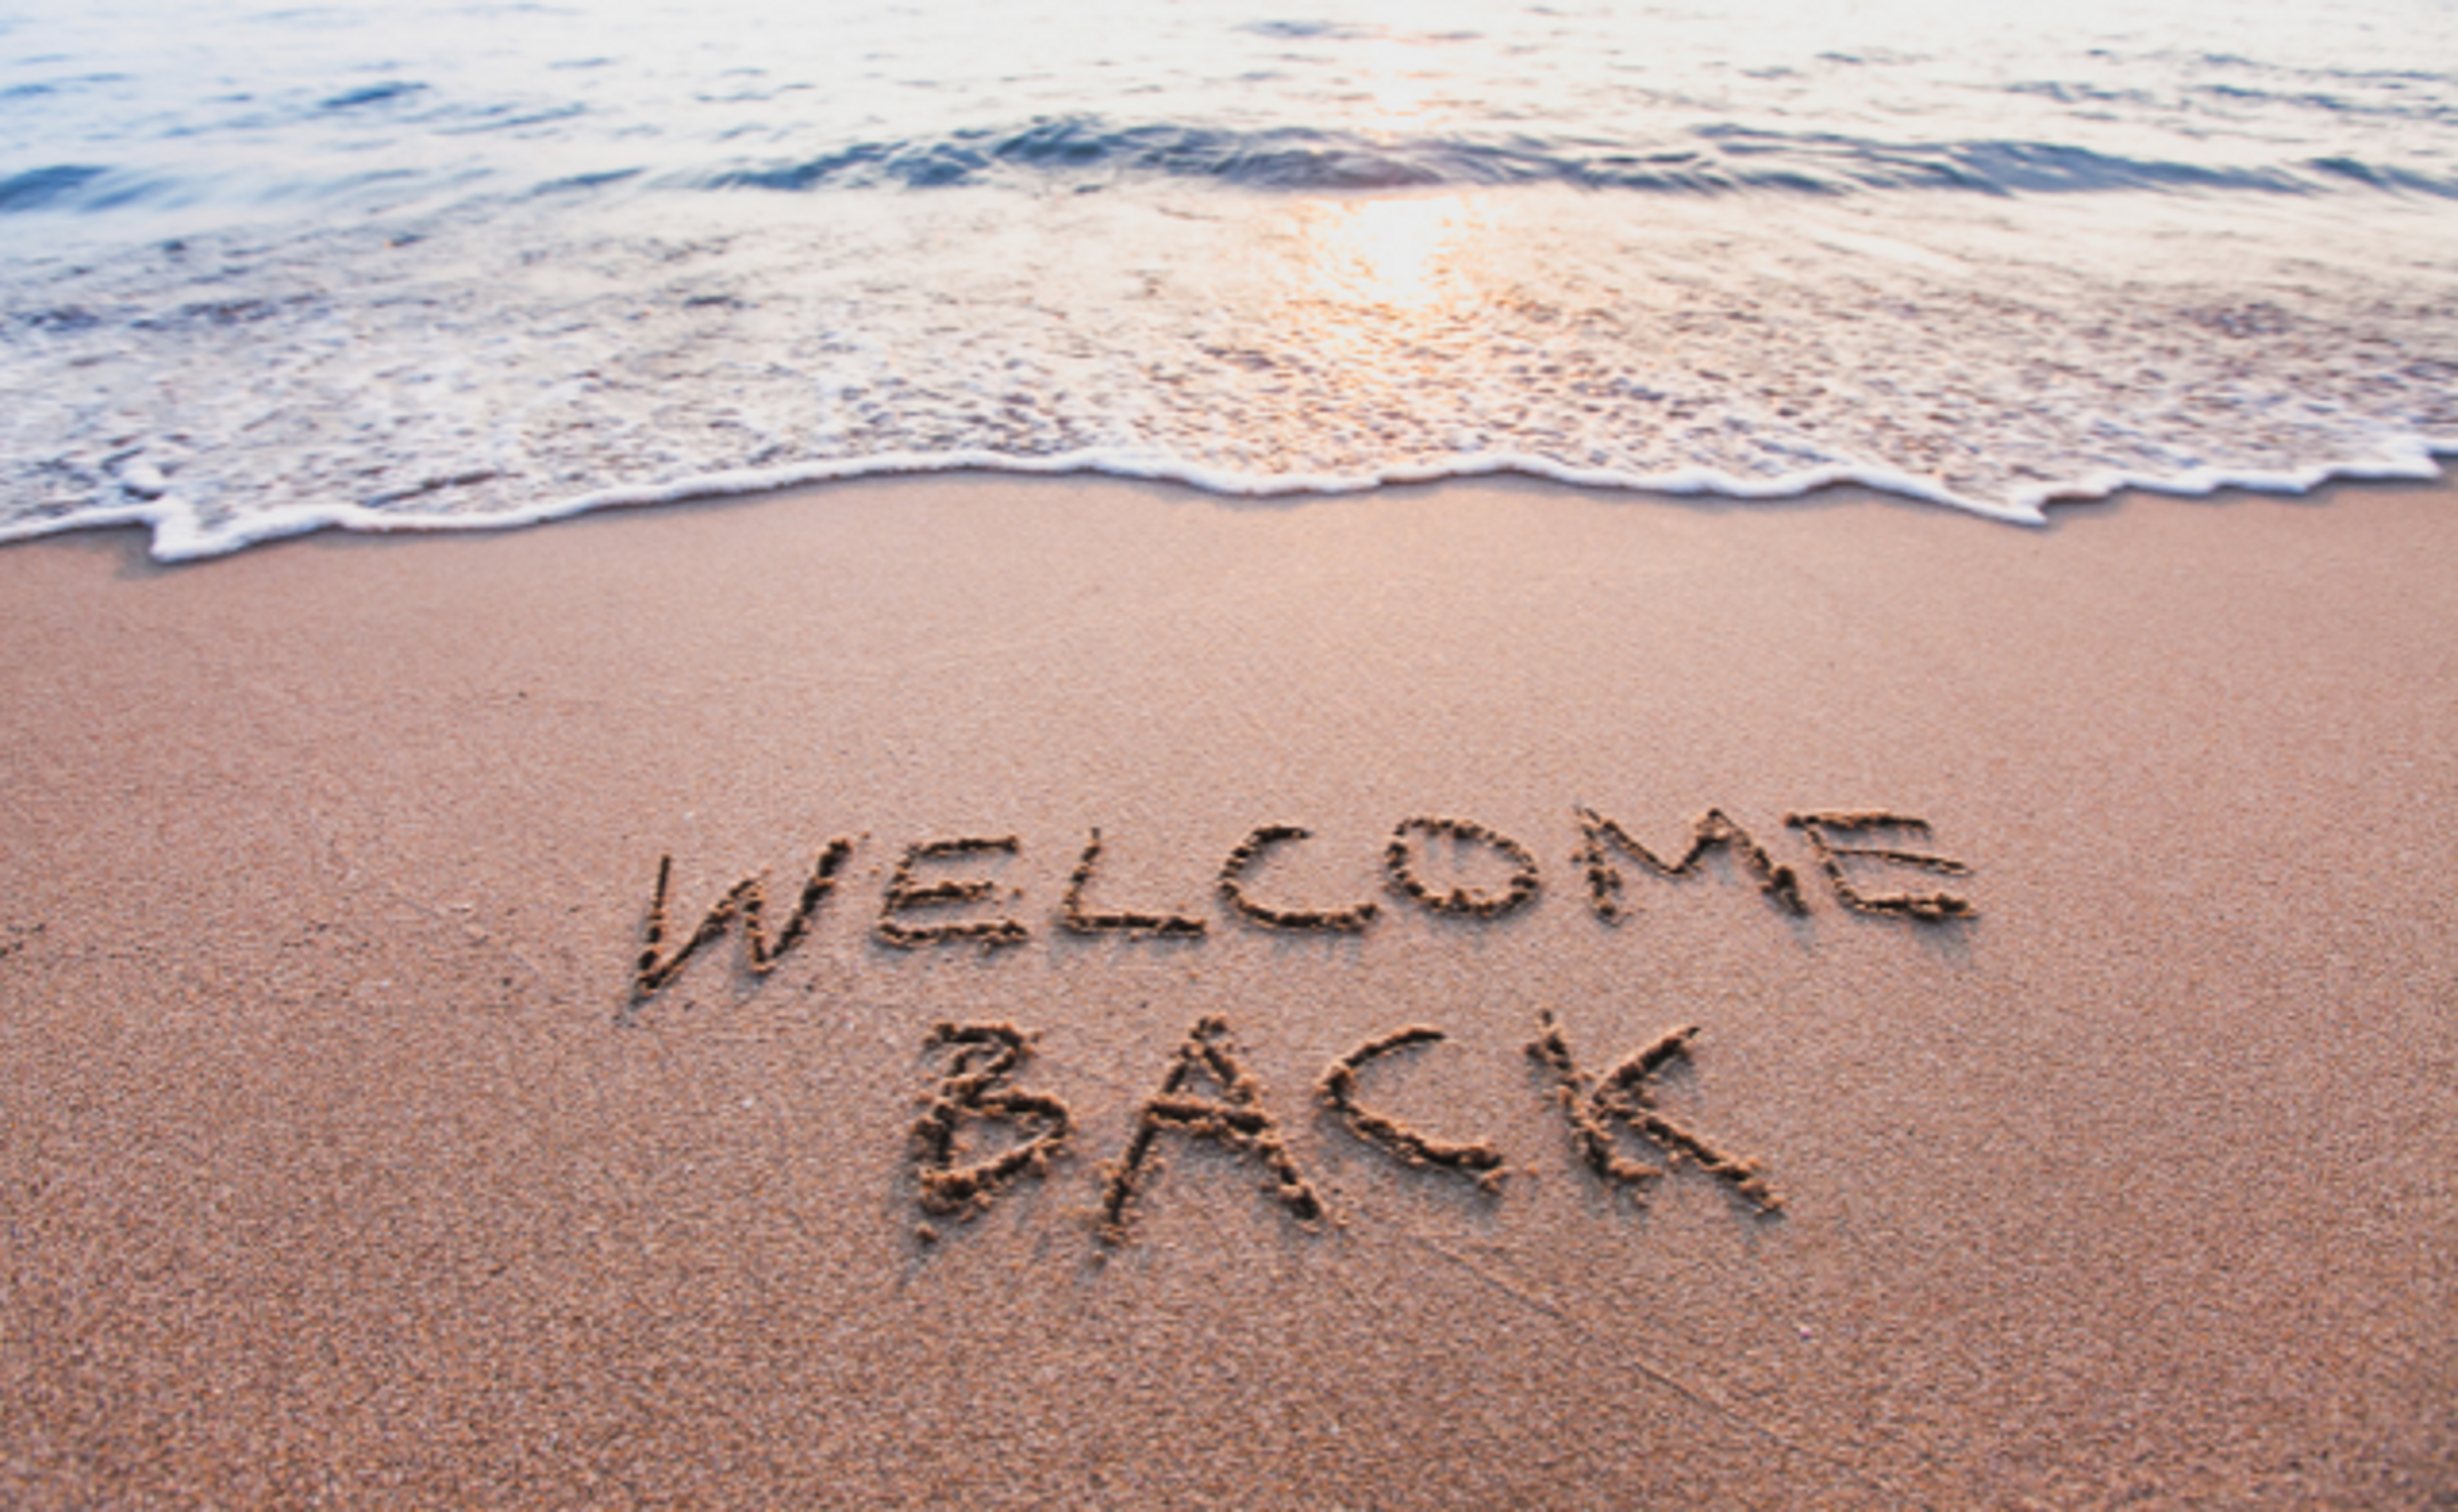 "Welcome back" written in the sand at the beach